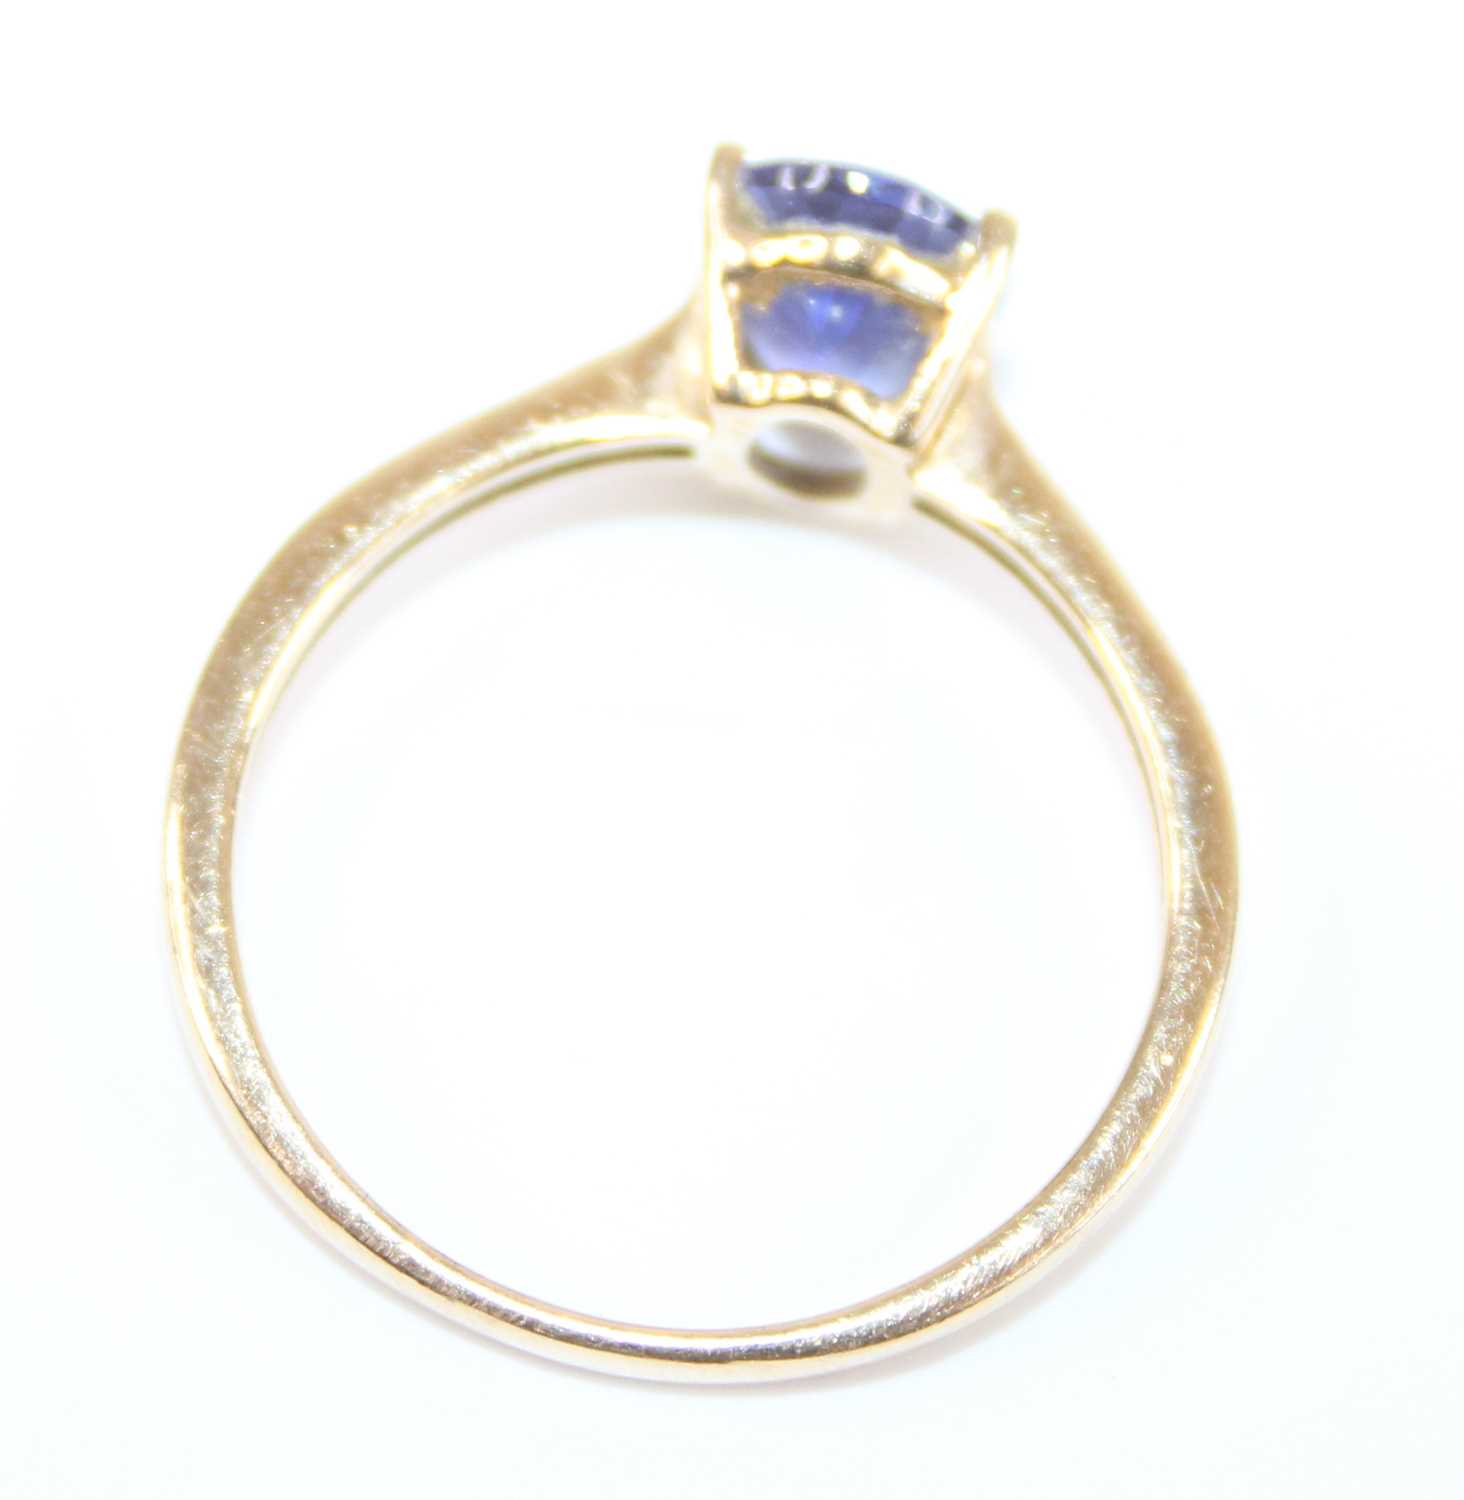 A 9ct gold tanzanite single stone pendant, featuring a cushion cut tanzanite in claw setting, - Image 6 of 9